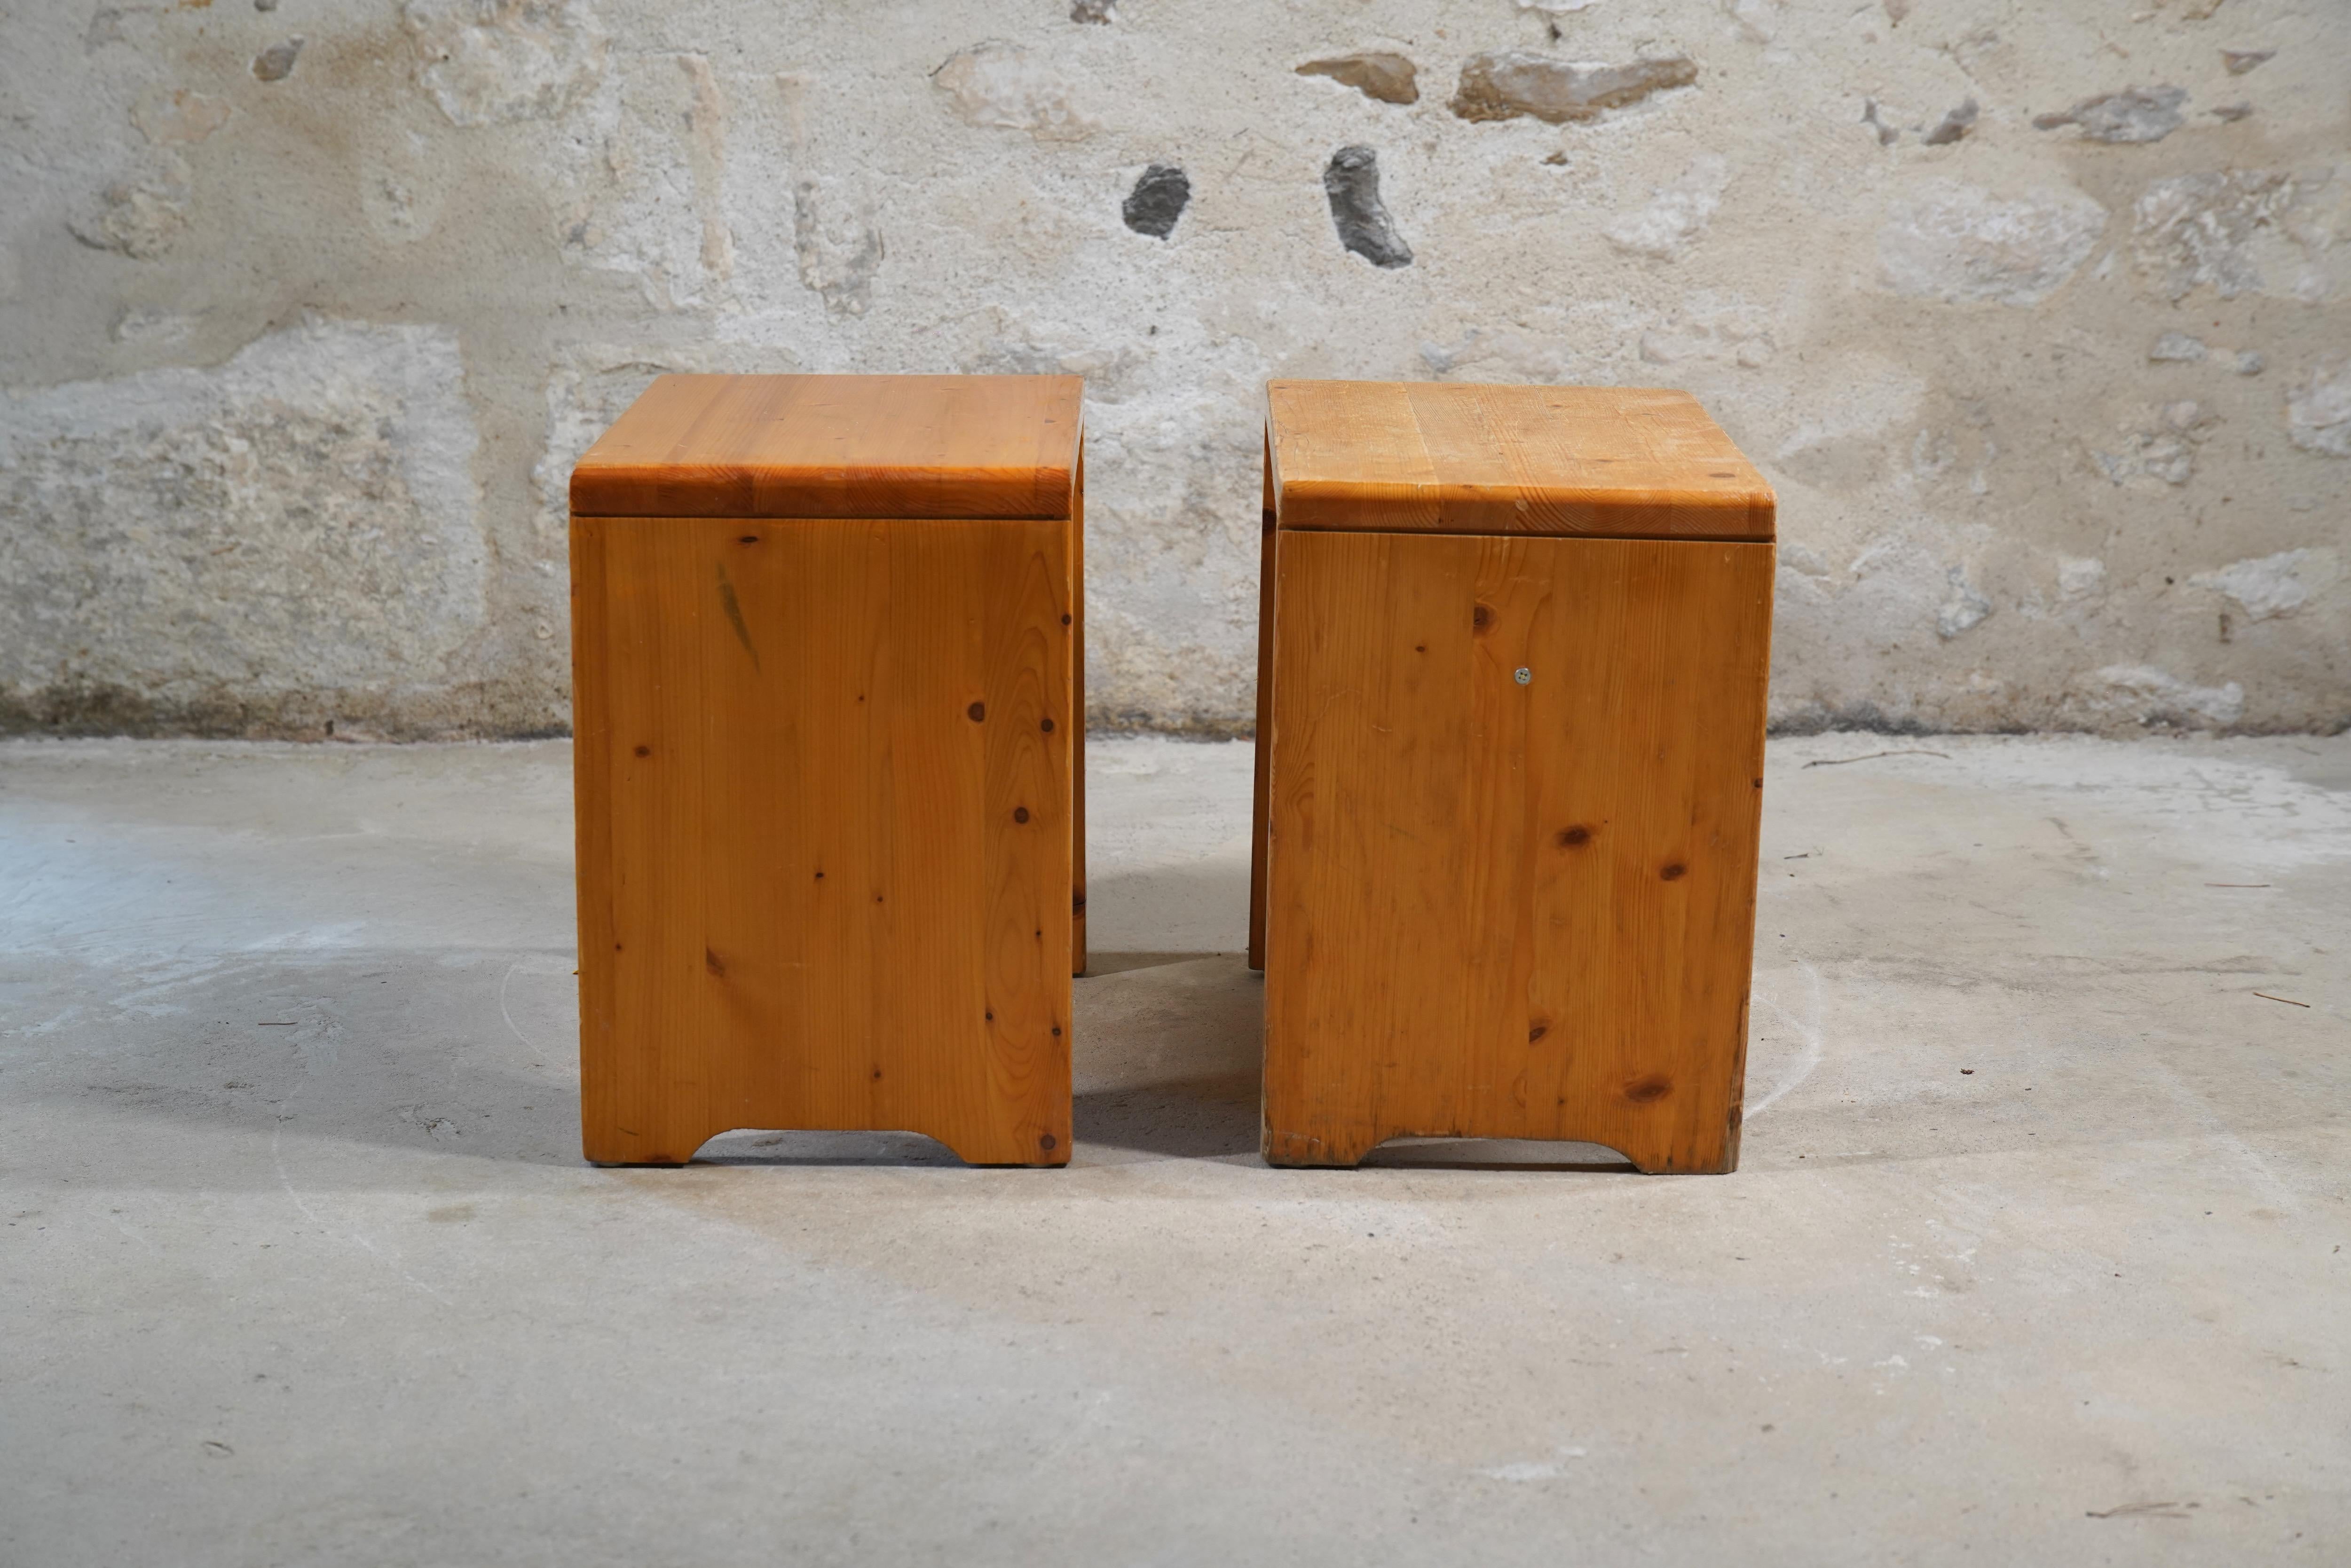 Charlotte Perriand Stools from Les Arcs, France circa 1968 (4 Available) For Sale 10